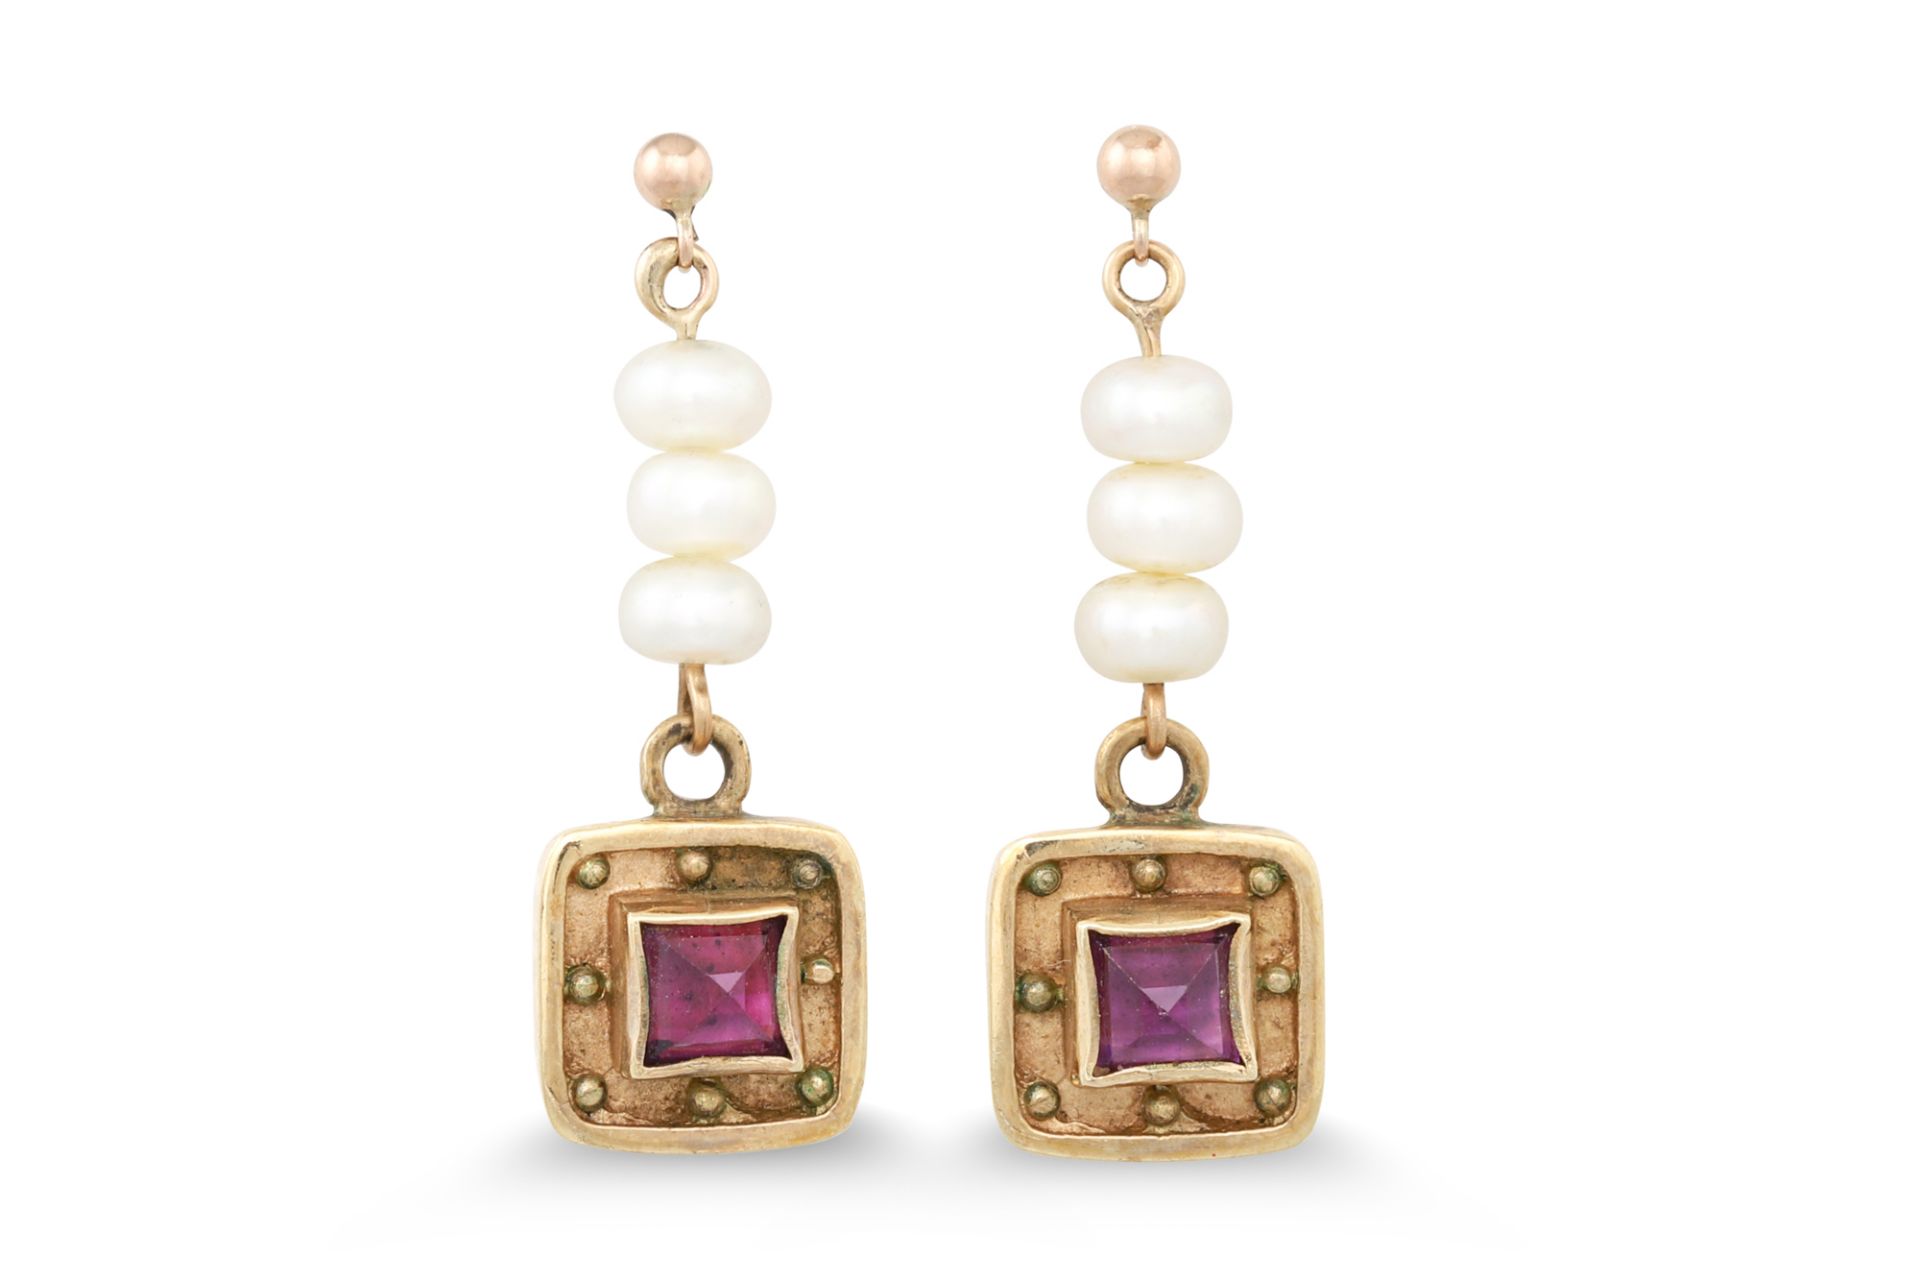 A PAIR OF CULTURED PEARL AND AMETHYST DROP EARRINGS, mounted in 9ct yellow gold